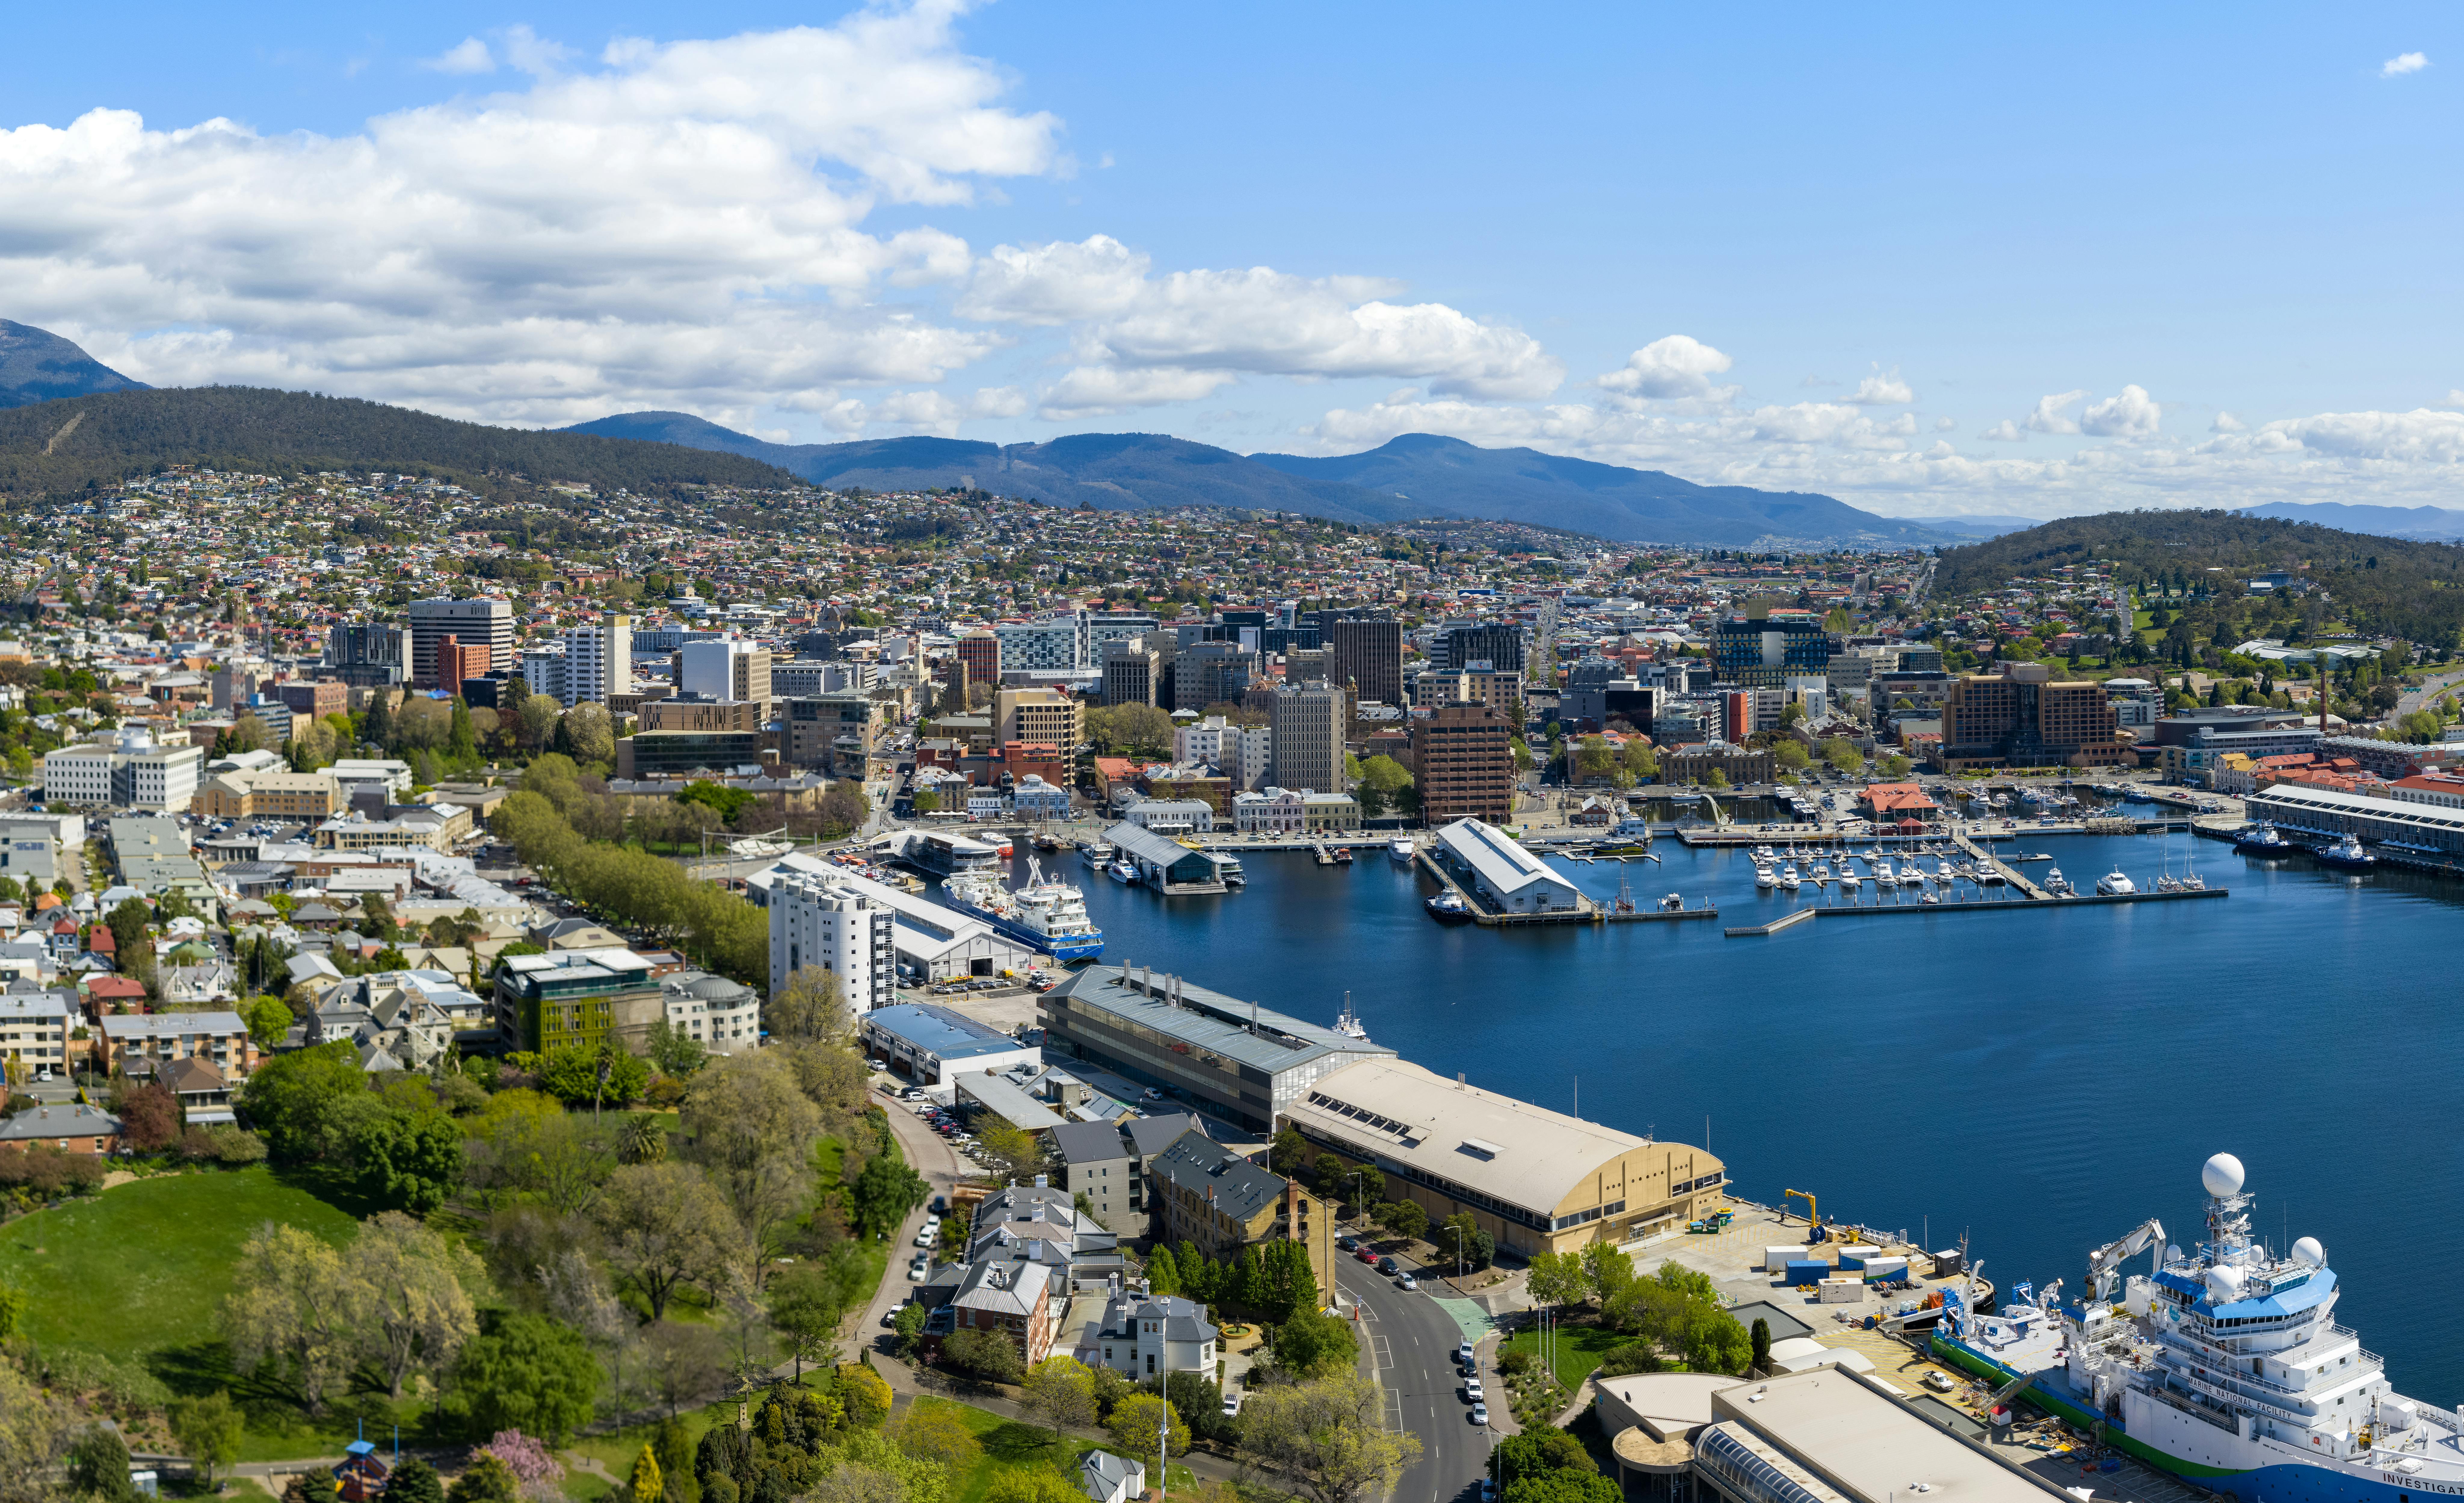 Aerial view of the City of Hobart